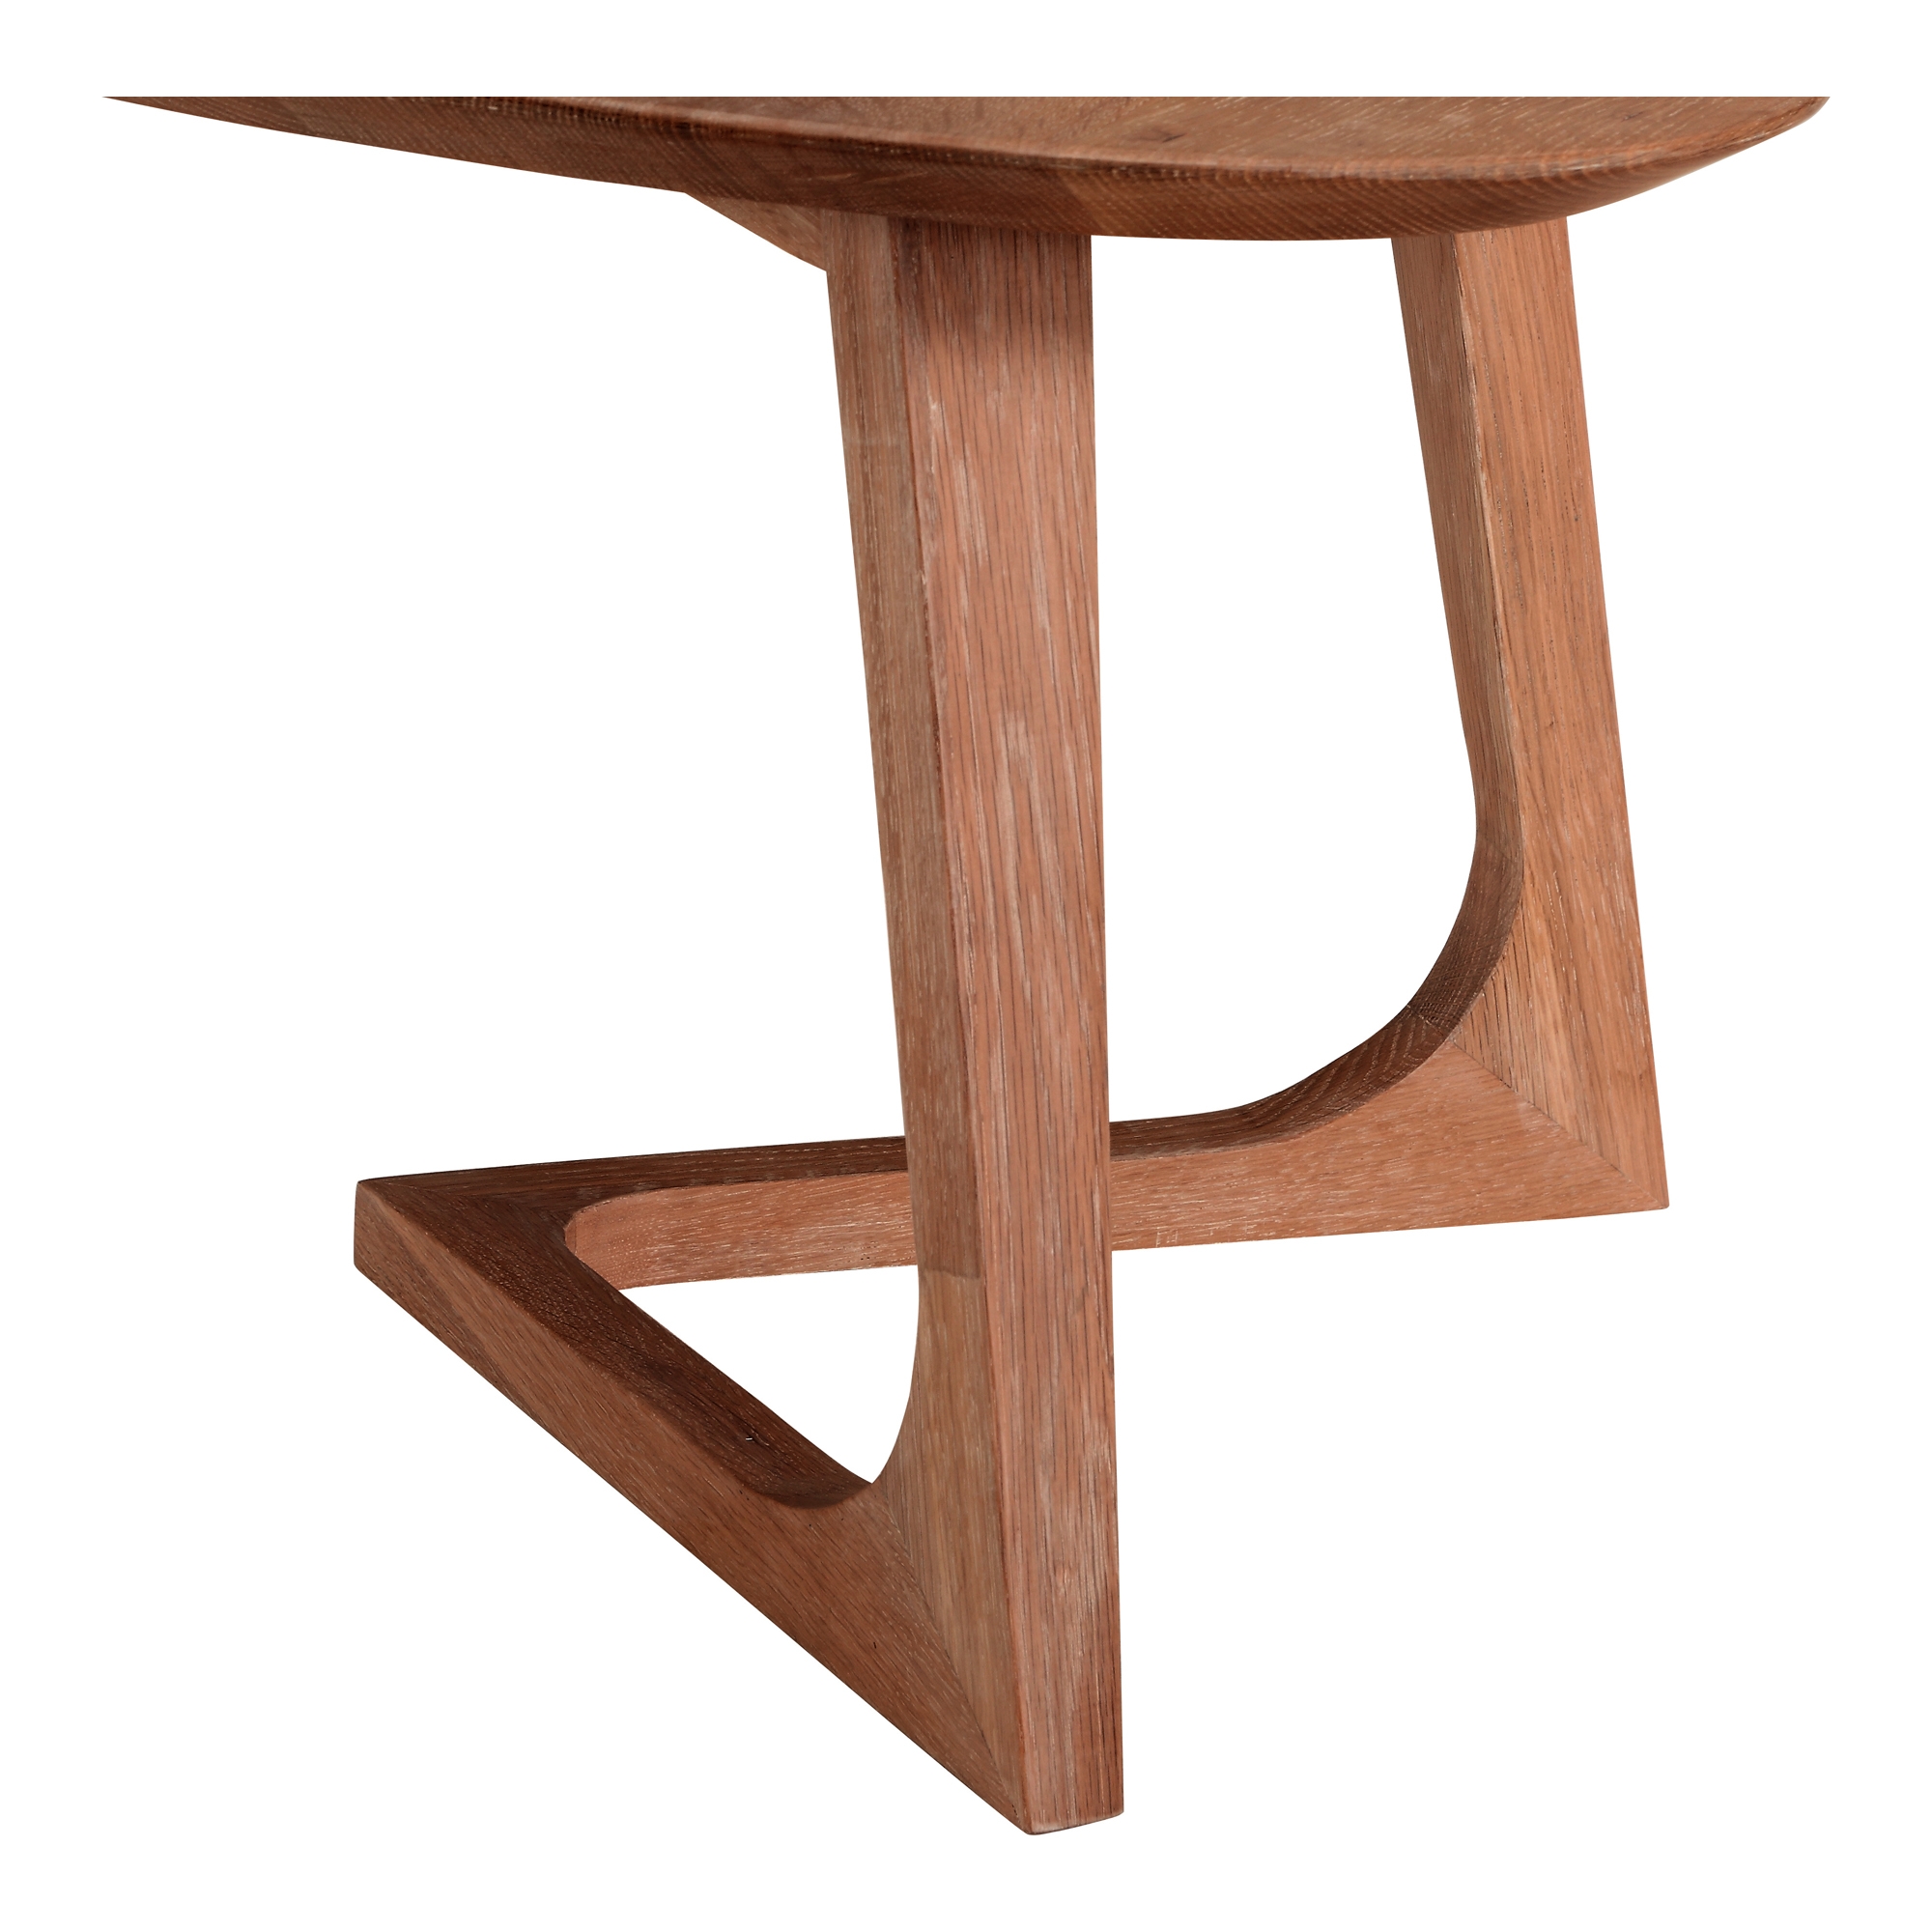 GODENZA END TABLE - Image 7